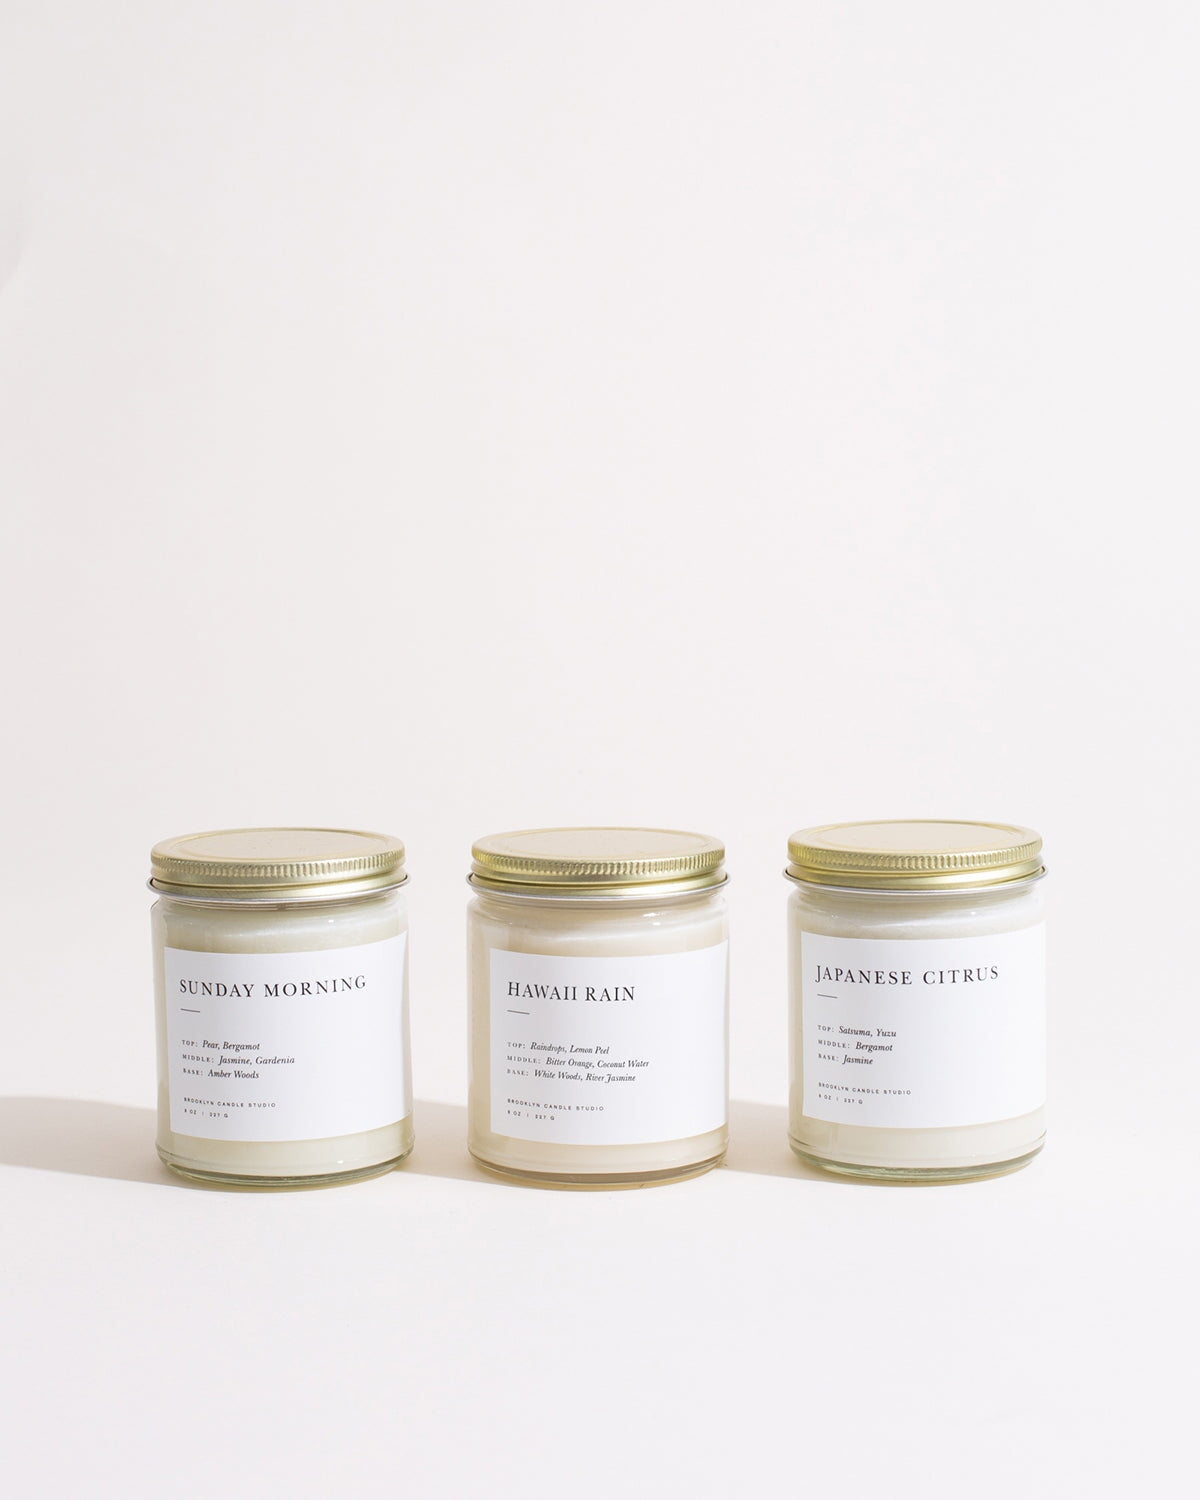 Pick 3 Minimalist Candles Gifting & Accessories Brooklyn Candle Studio 